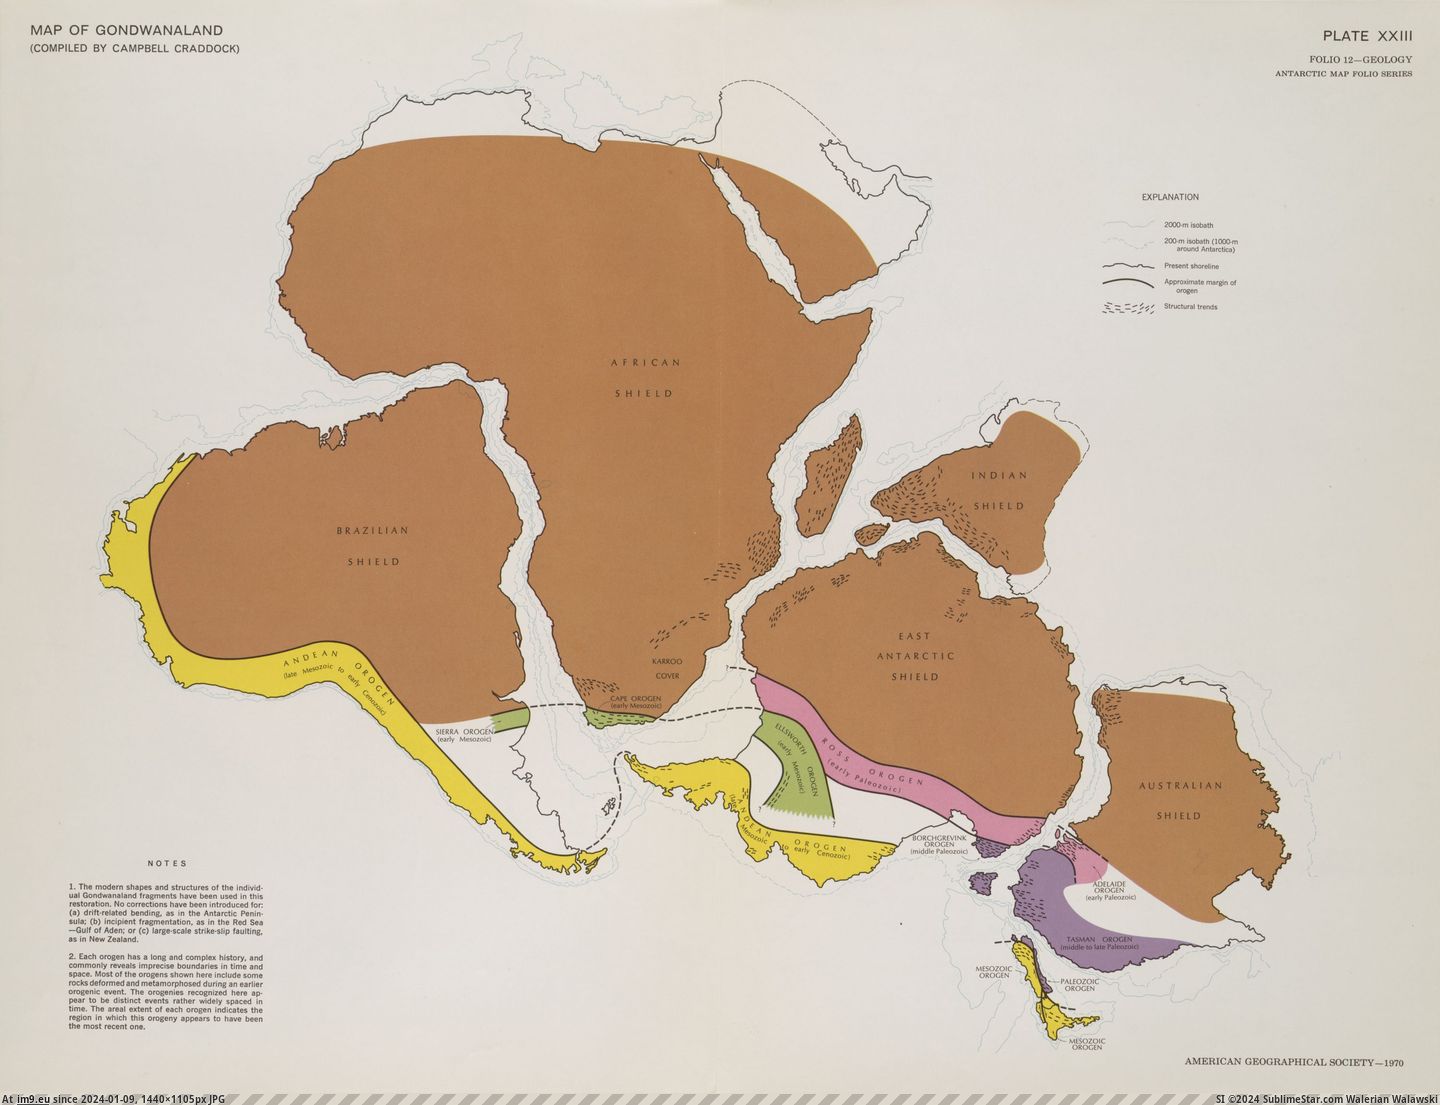 #Map #American #Campbell #Society #Compiled [Mapporn] Map of Gondwanaland (compiled by Campbell Craddock). American Geographical Society, 1970. [3000x2278] Pic. (Image of album My r/MAPS favs))